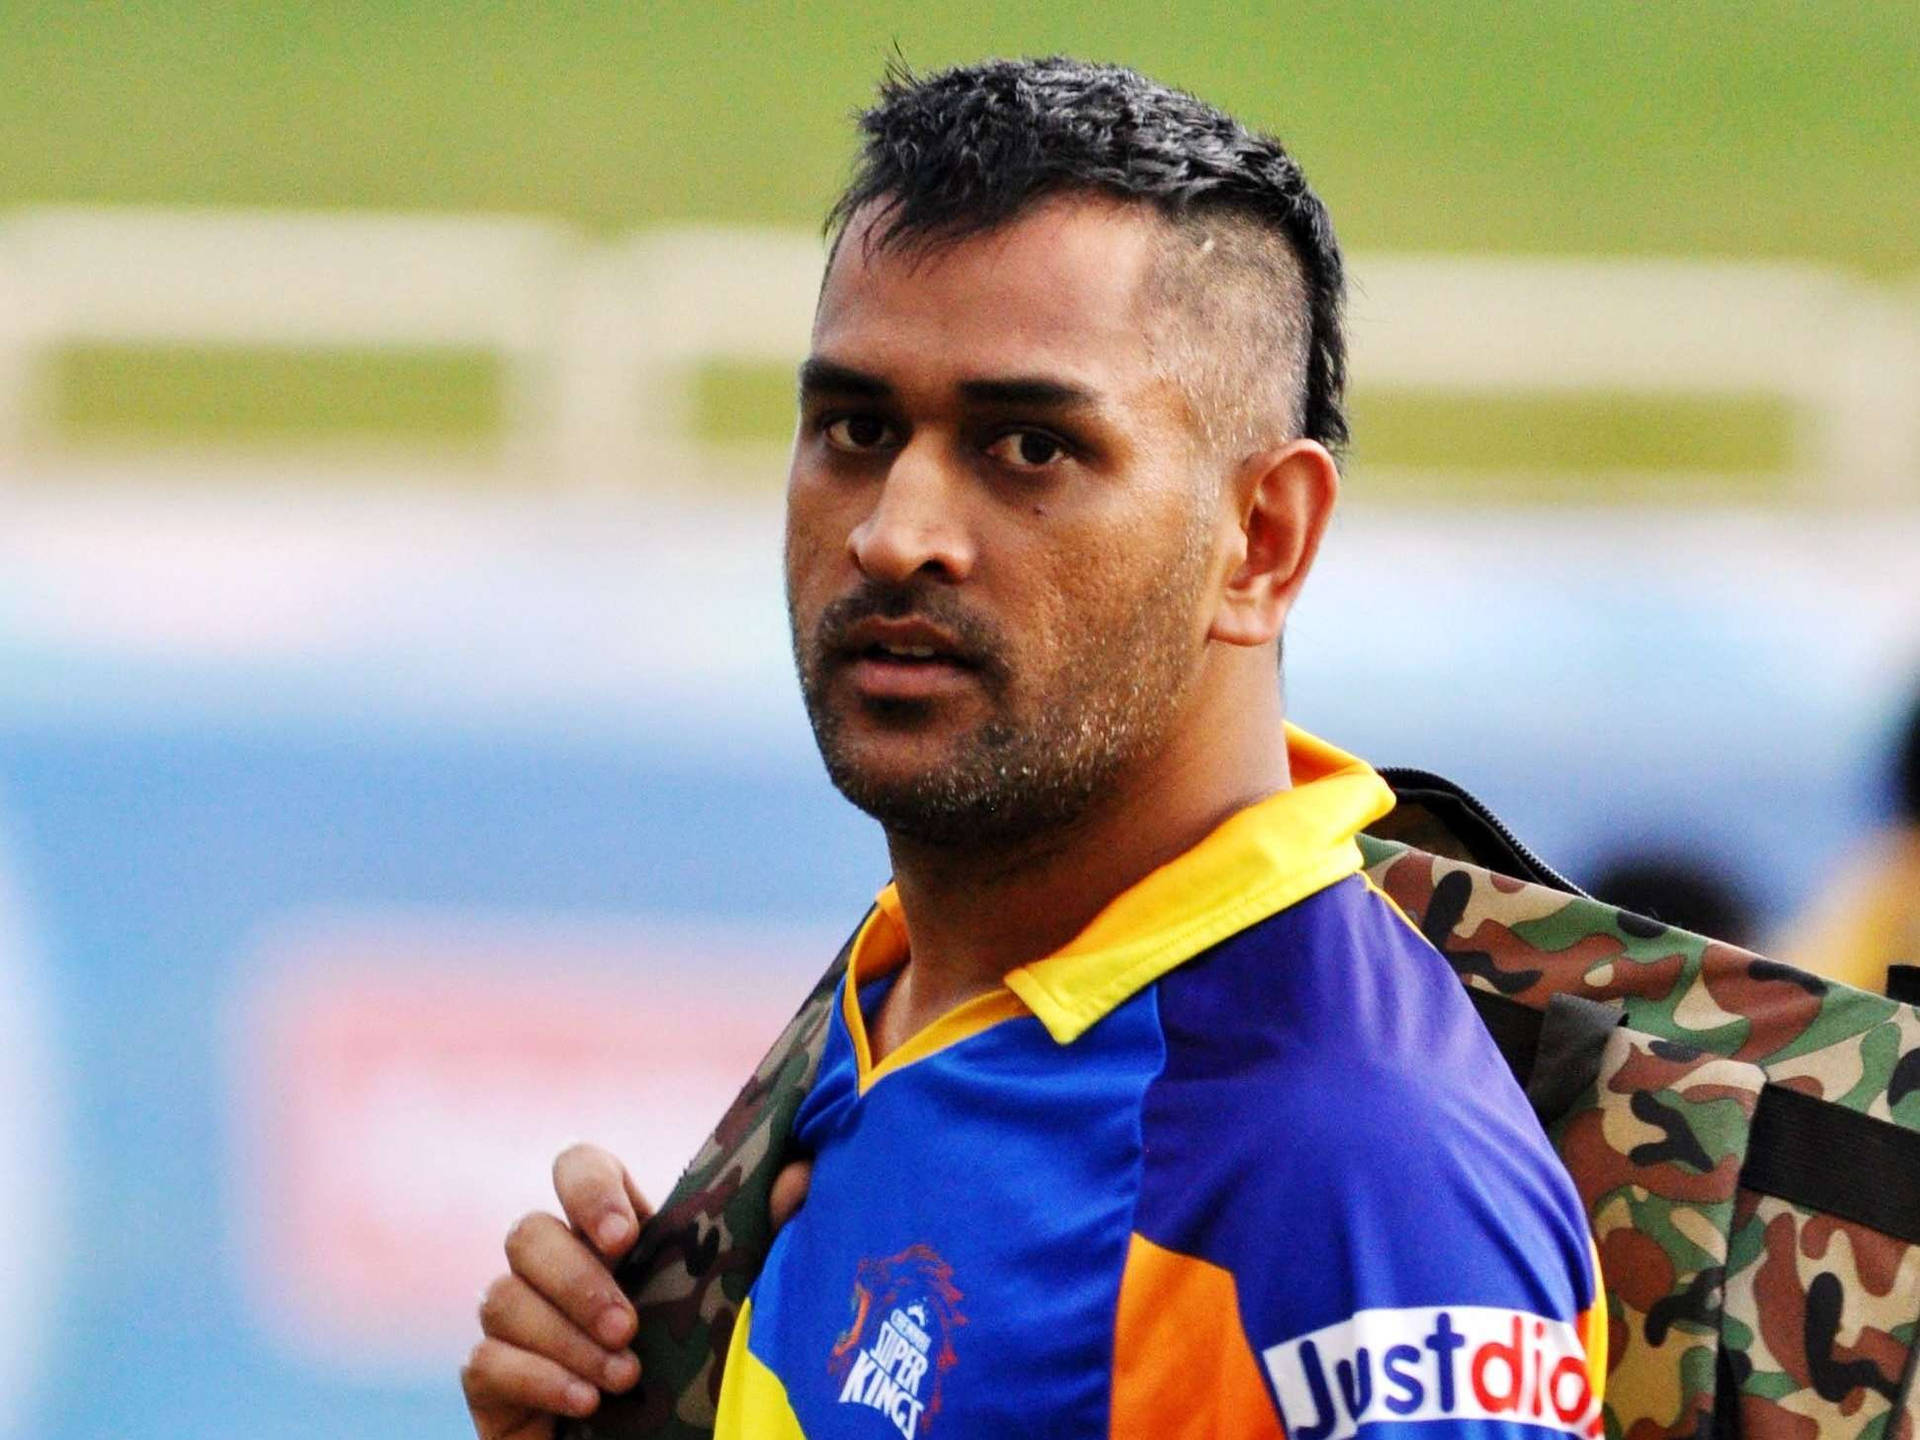 Newlook Dhoni returns to competitive cricket after 437 days